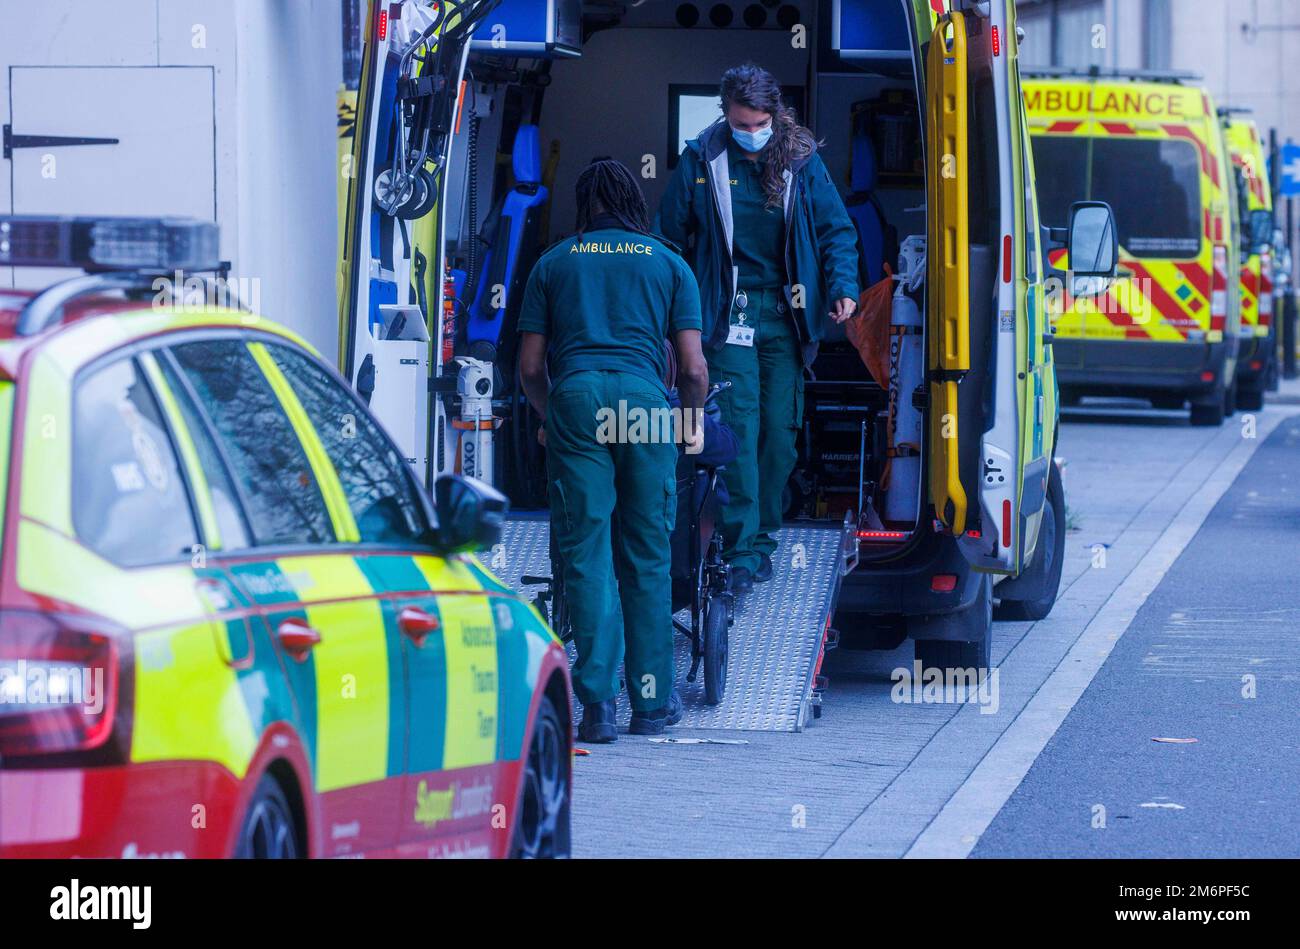 London, UK 5 Jan 2023 Ambulance workers at work at the Royal London hospital in Whitechapel, London. Pressure on the NHS is intolerable and unsustainable, according to the British Medical Association (BMA) which represents doctors. Chair of the BMA council, Professor Phil Banfield, has called on the government to step up and take immediate action to solve the crisis. Hospitals are facing soaring demands, which experts believe is in part driven by winter illnesses like flu and Covid. The government said it recognised the pressures faced by the NHS. Credit: Mark Thomas/Alamy Live News Stock Photo